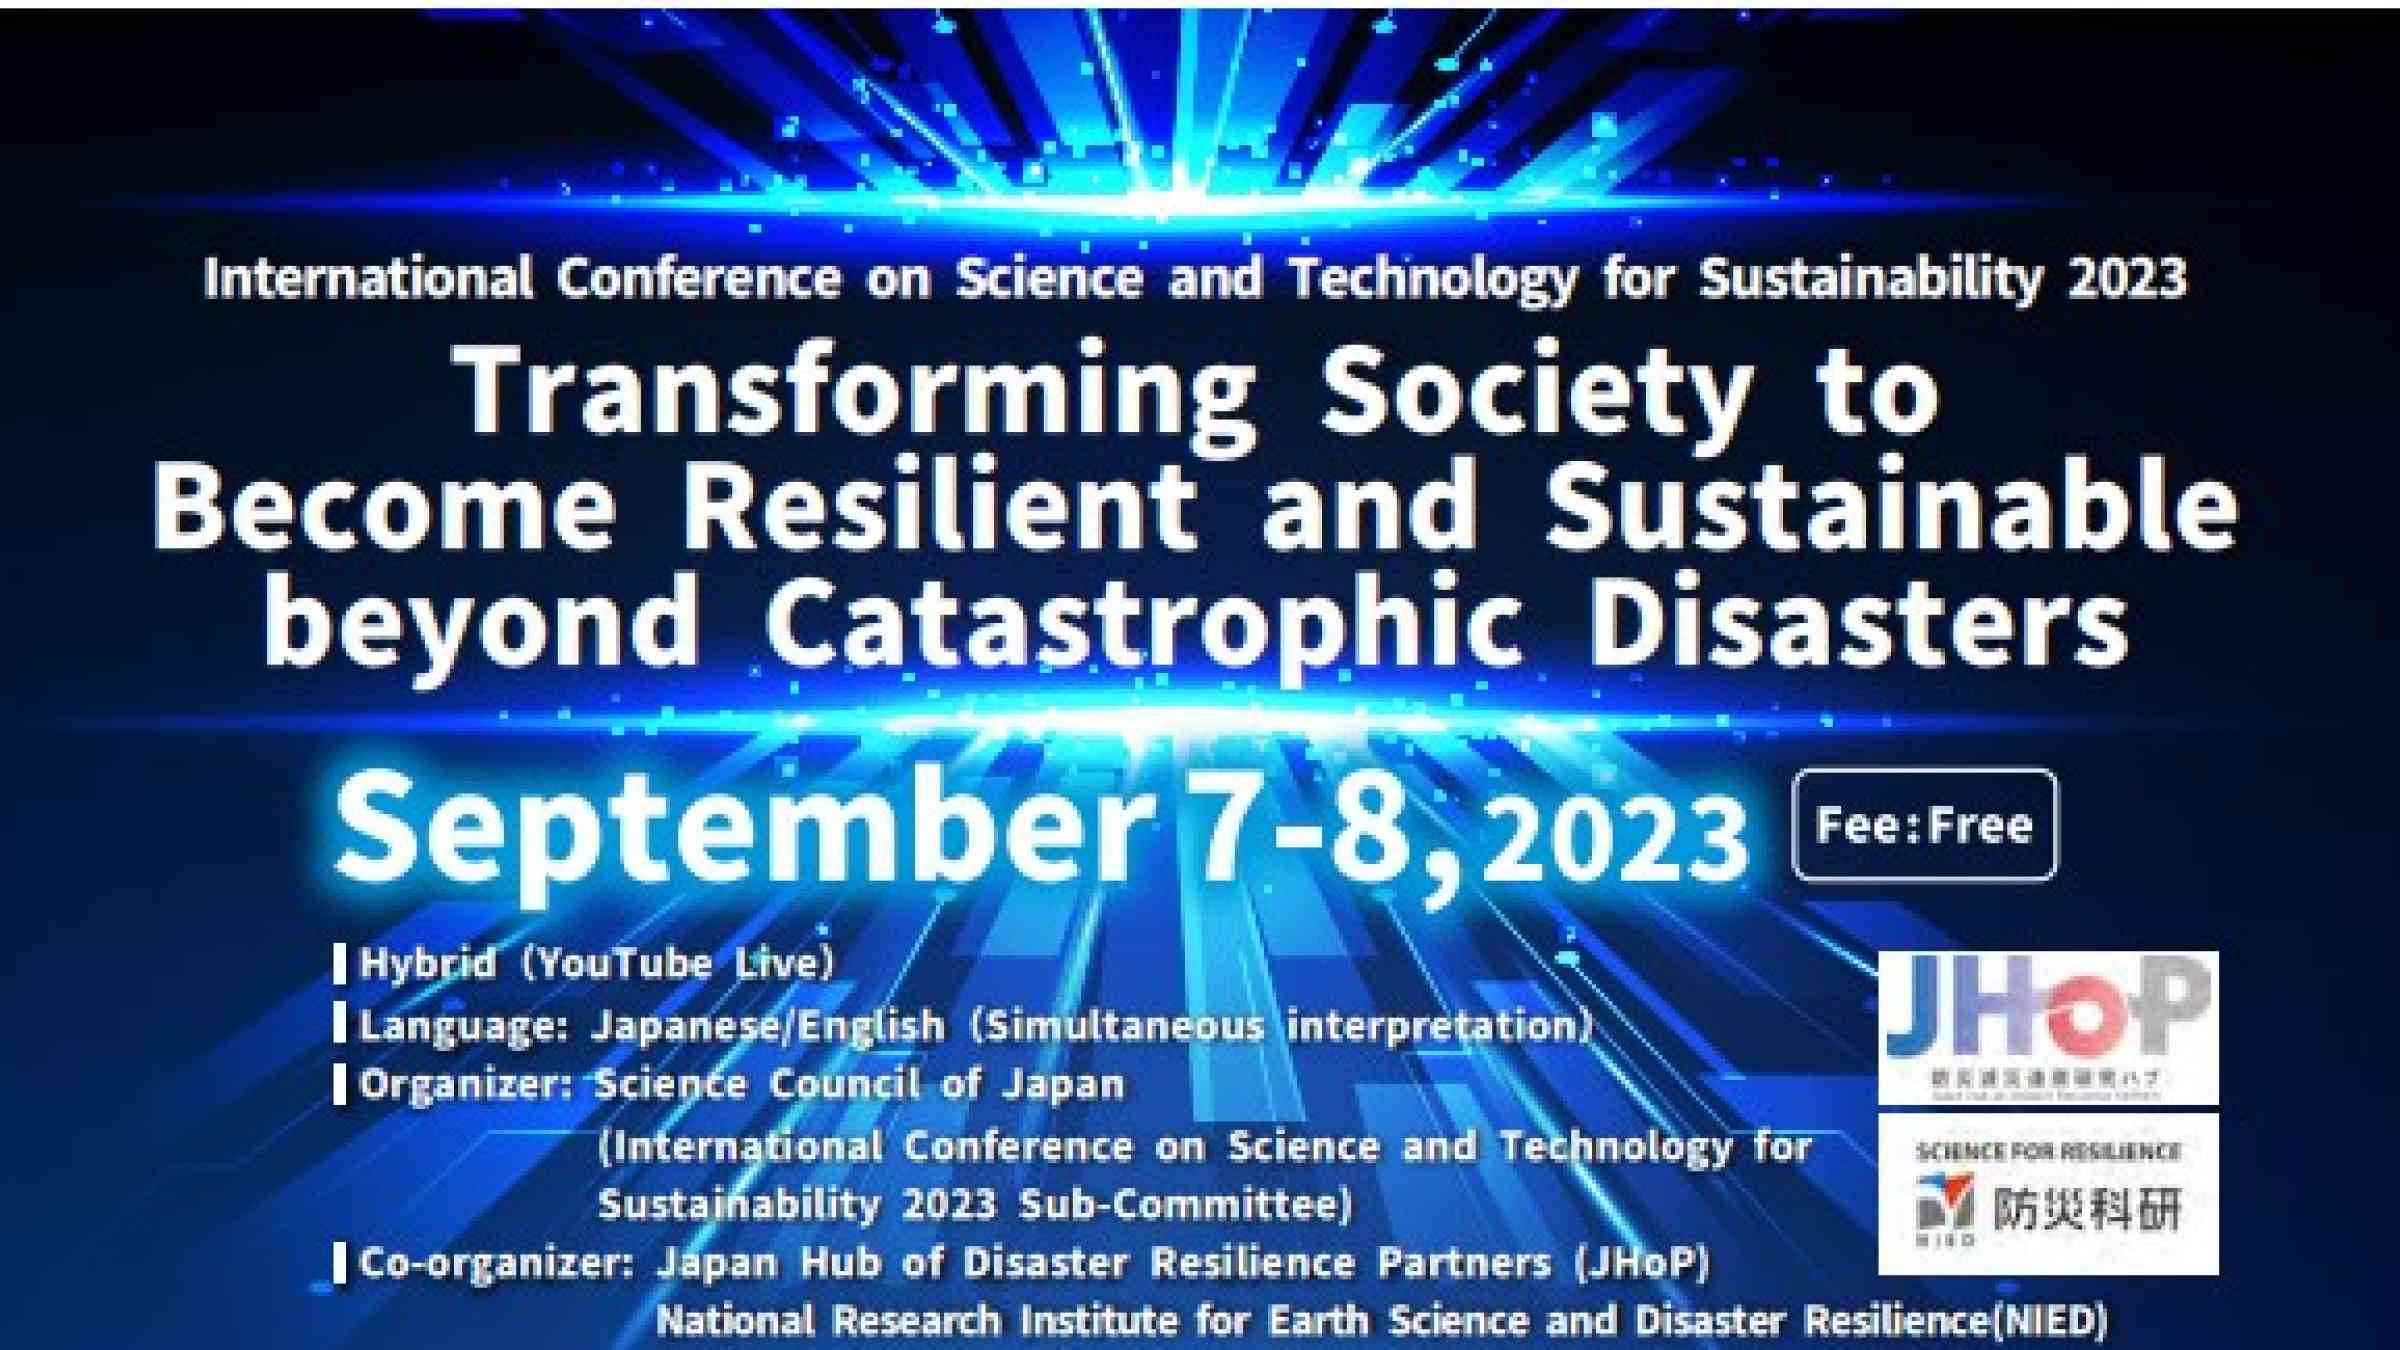 International Conference on Science and Technology for Sustainability 2023 